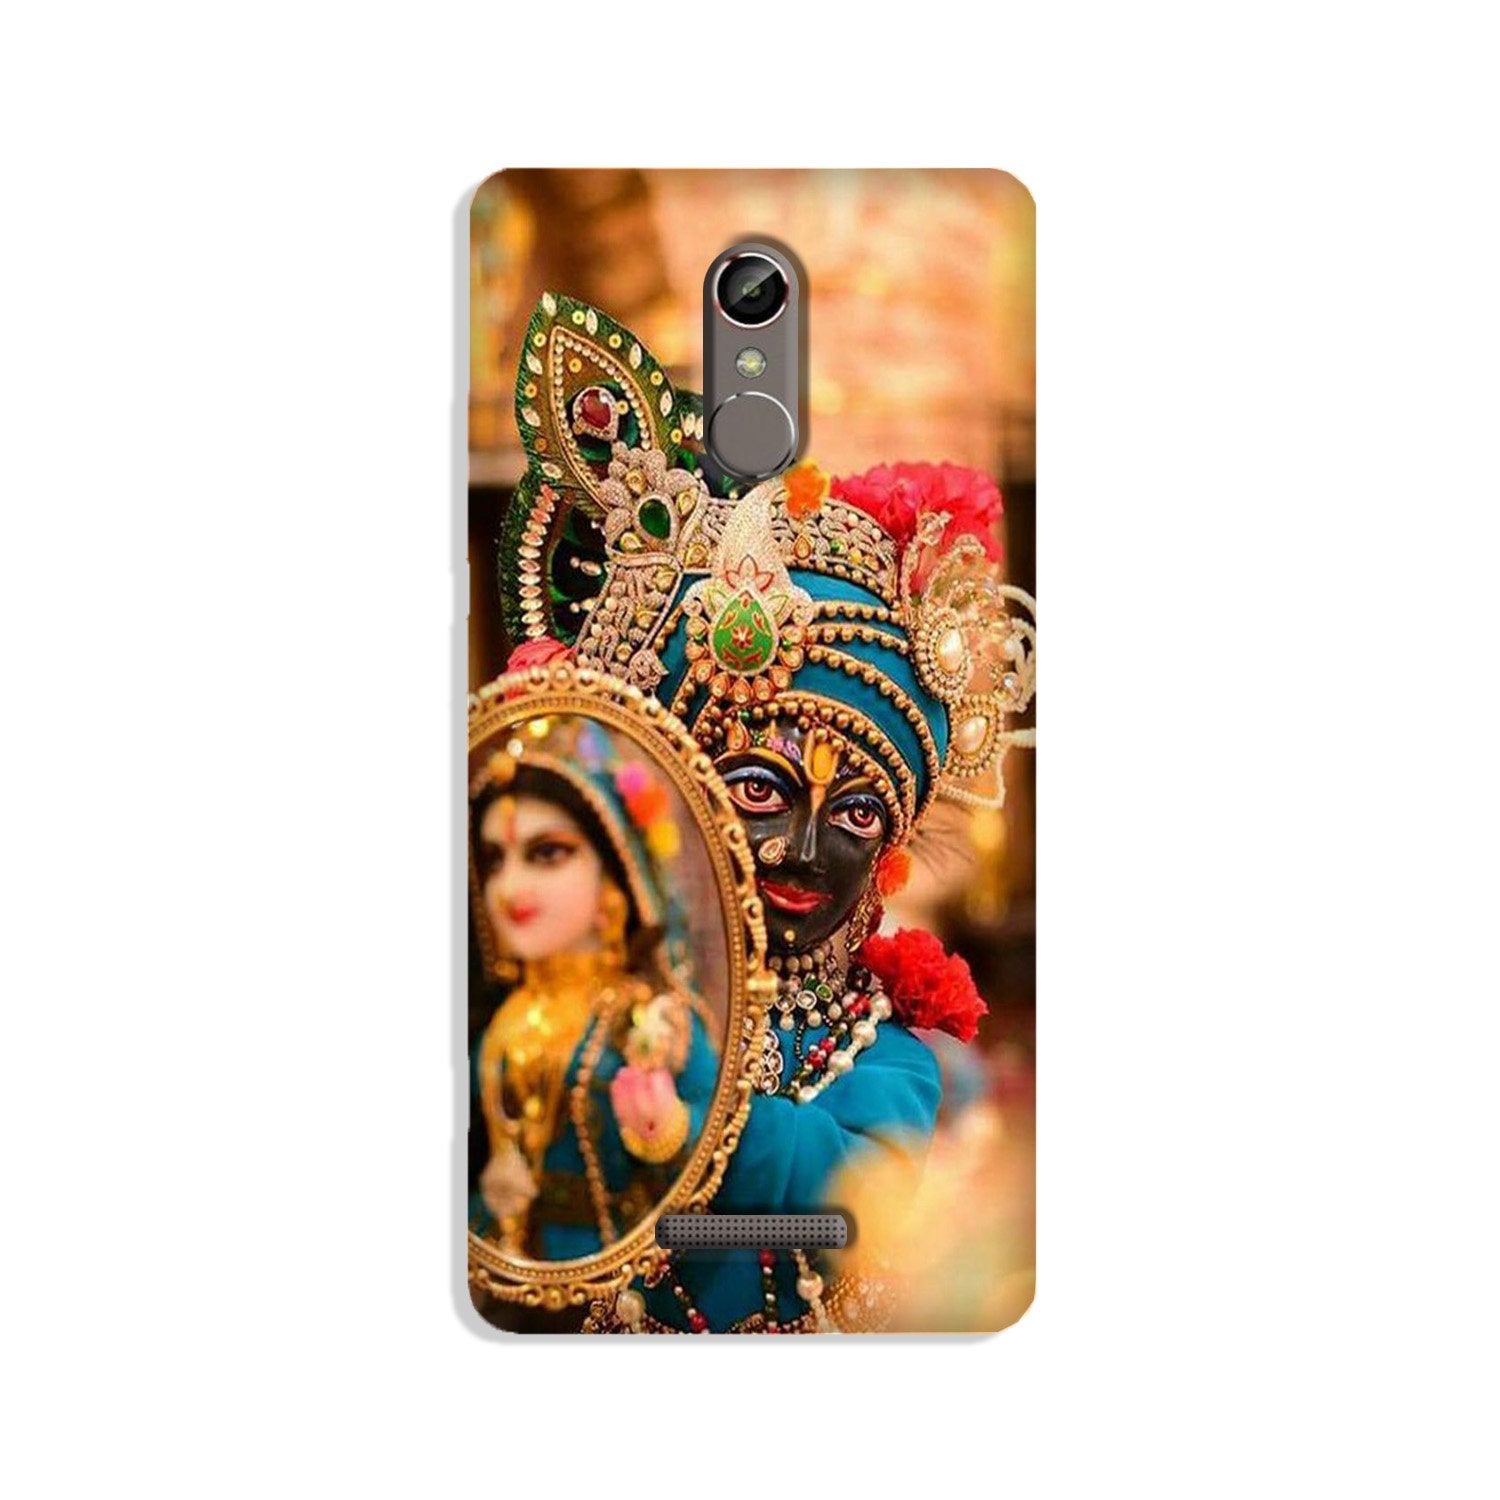 Lord Krishna5 Case for Gionee S6s